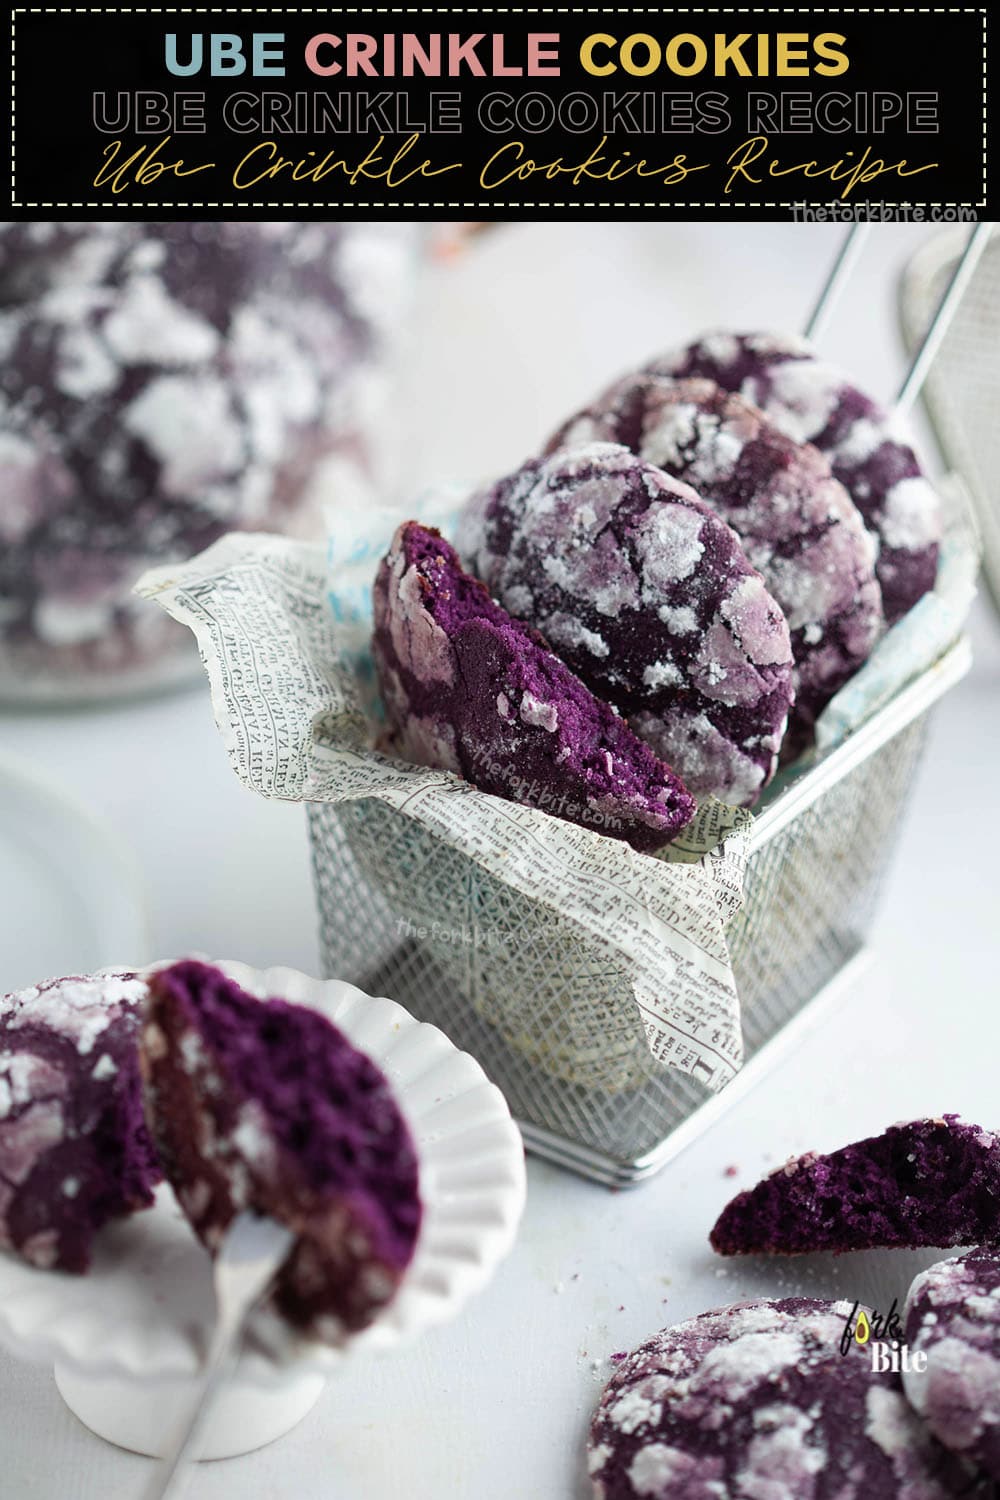 Try these Ube crinkle cookies if you have a sweet tooth and a passion for freshly-baked cookies or appreciate the nutty, rich flavor of purple yum cookies!